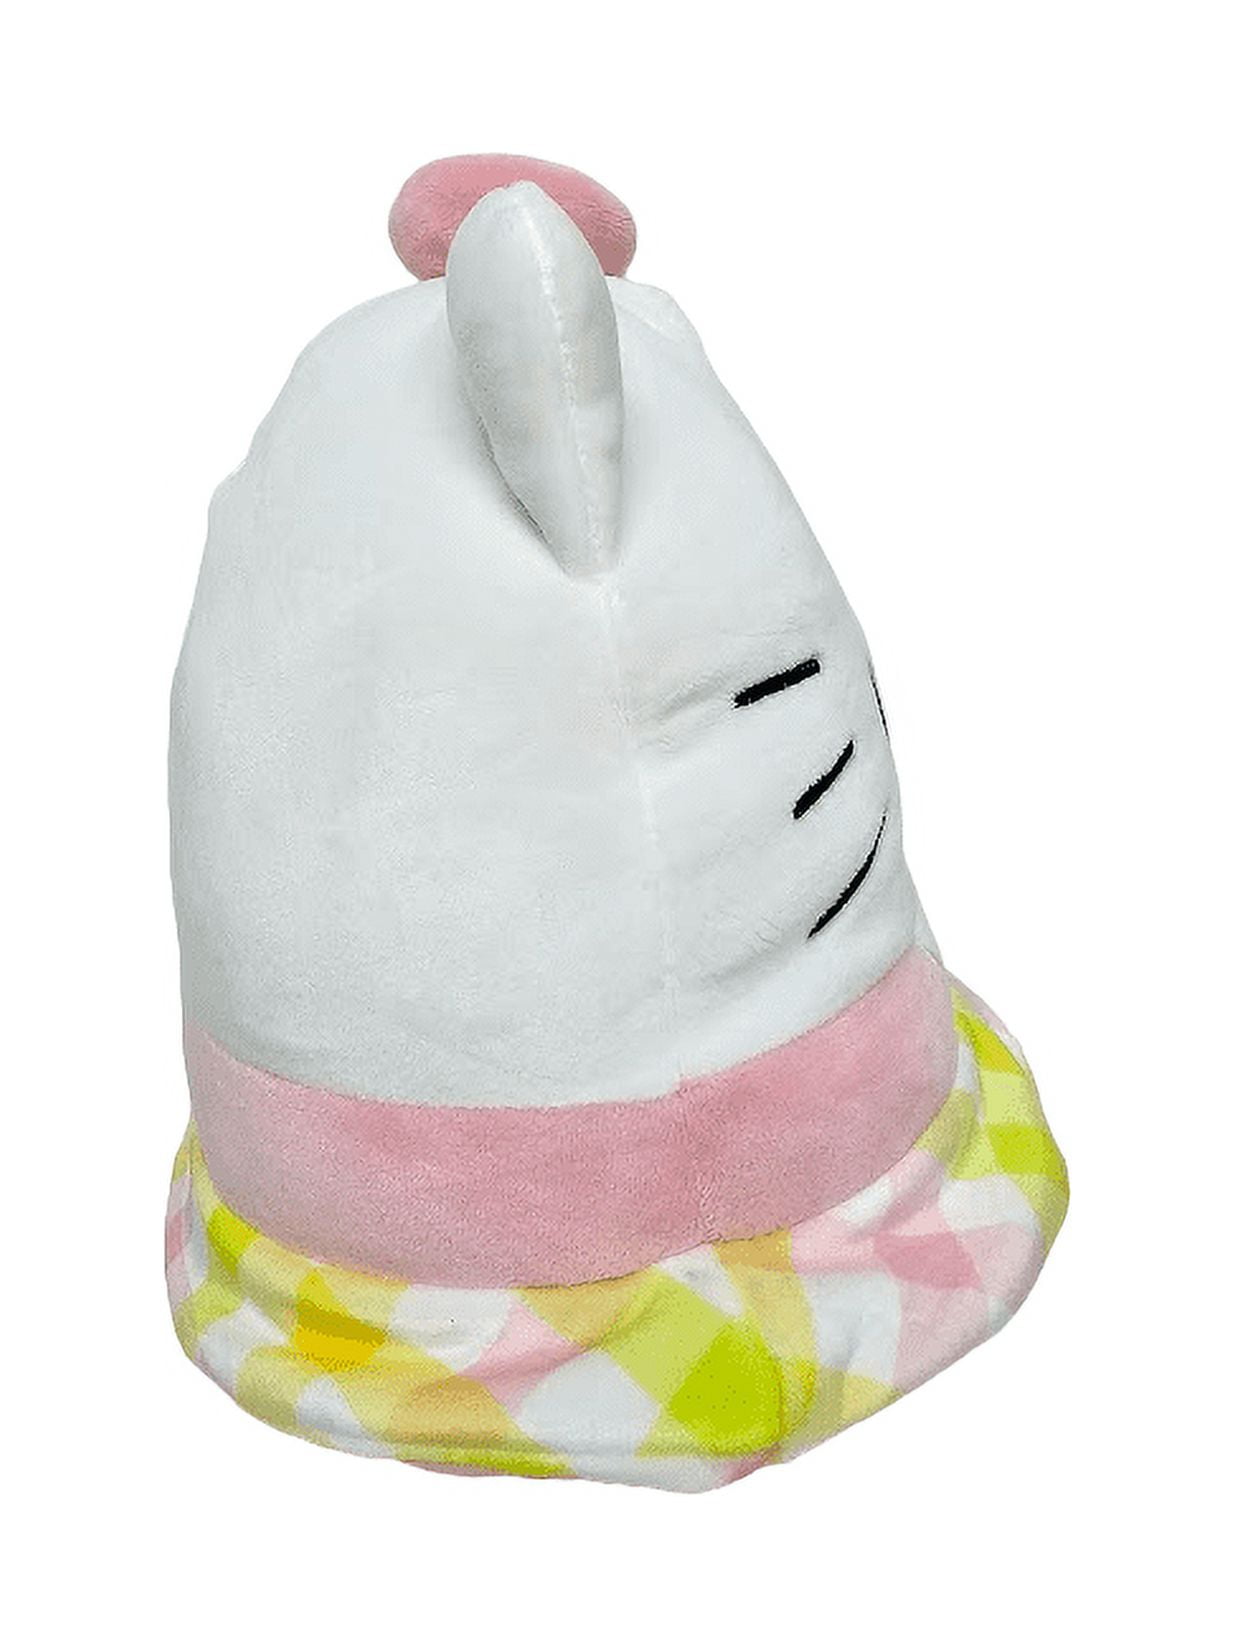 Squishmallows 8 Pink Plaid Hello Kitty Plush Toy, 8 in - Fred Meyer